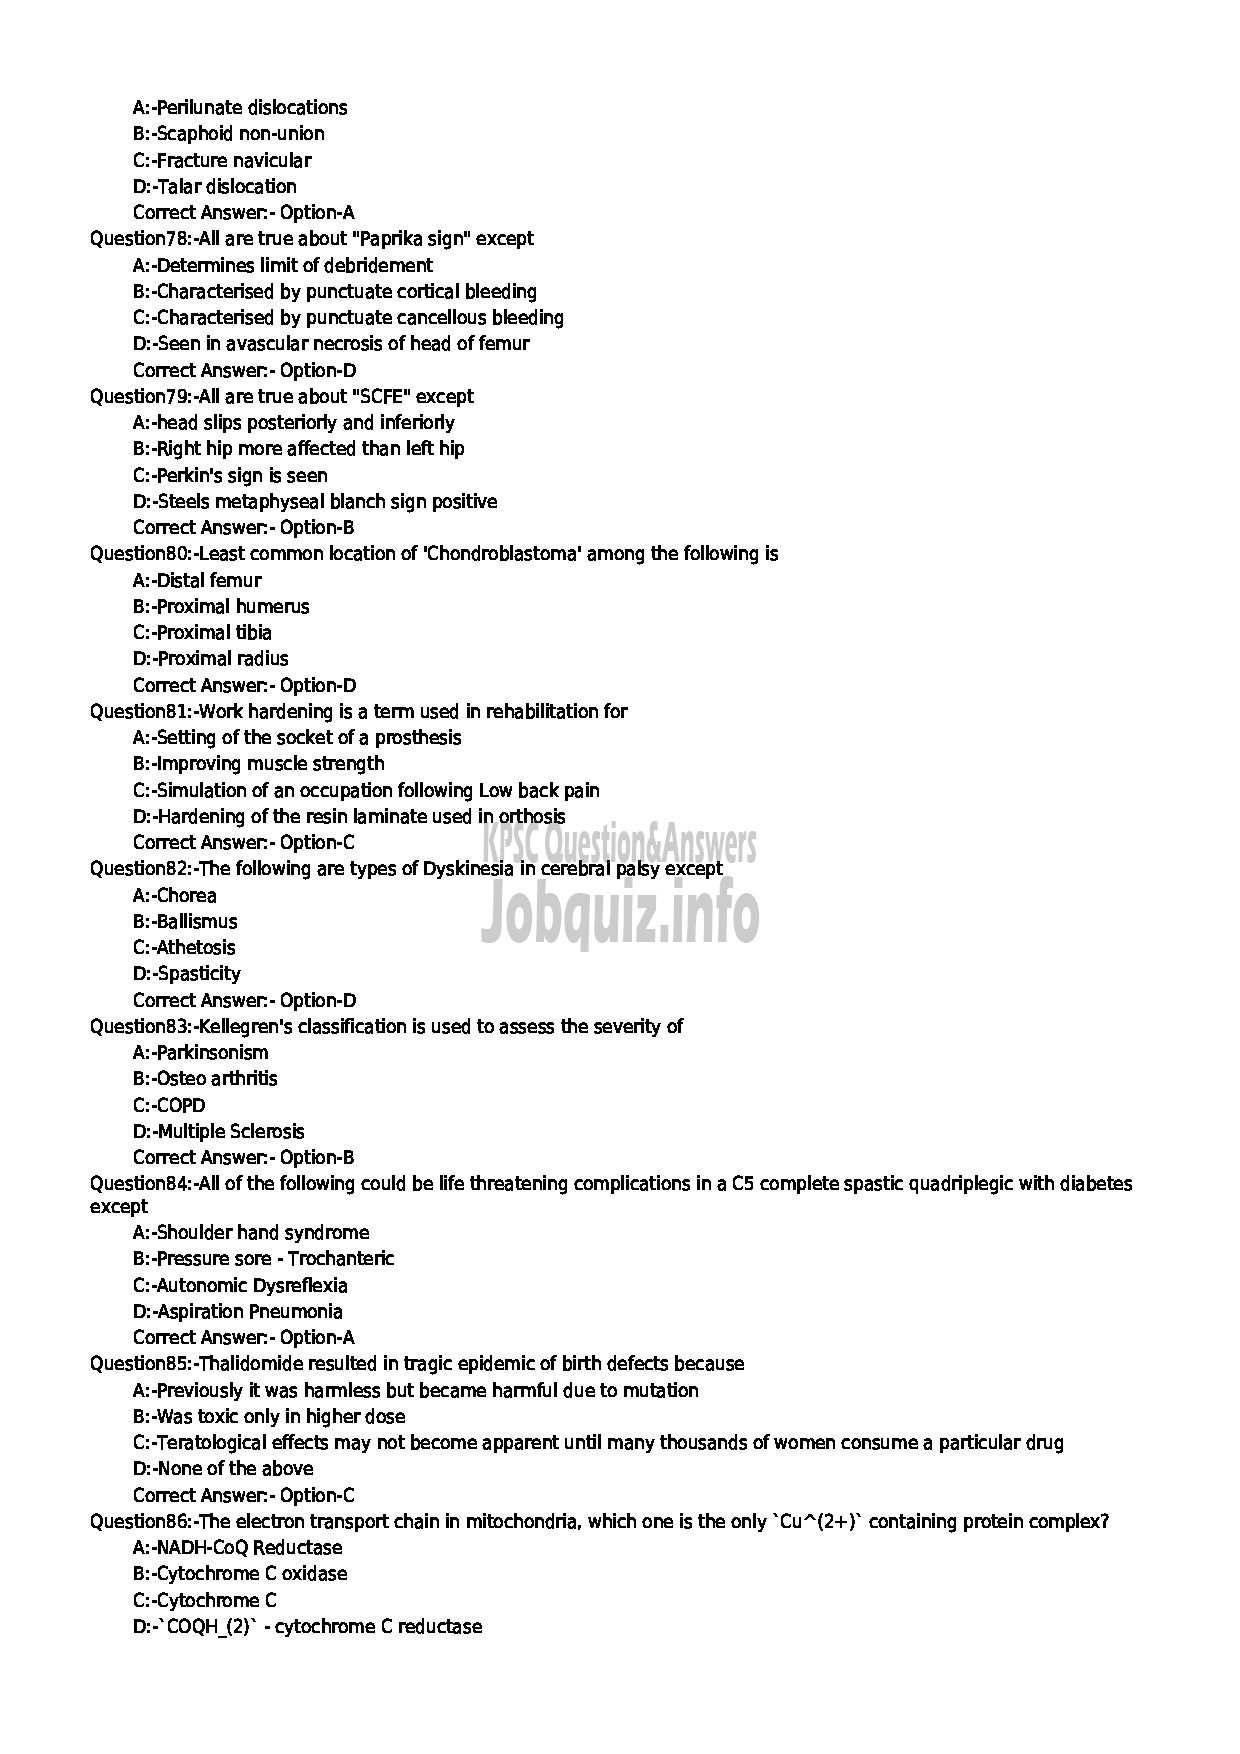 Kerala PSC Question Paper - Assistant Surgeon / casuality Medicine NCA Medical Education-9